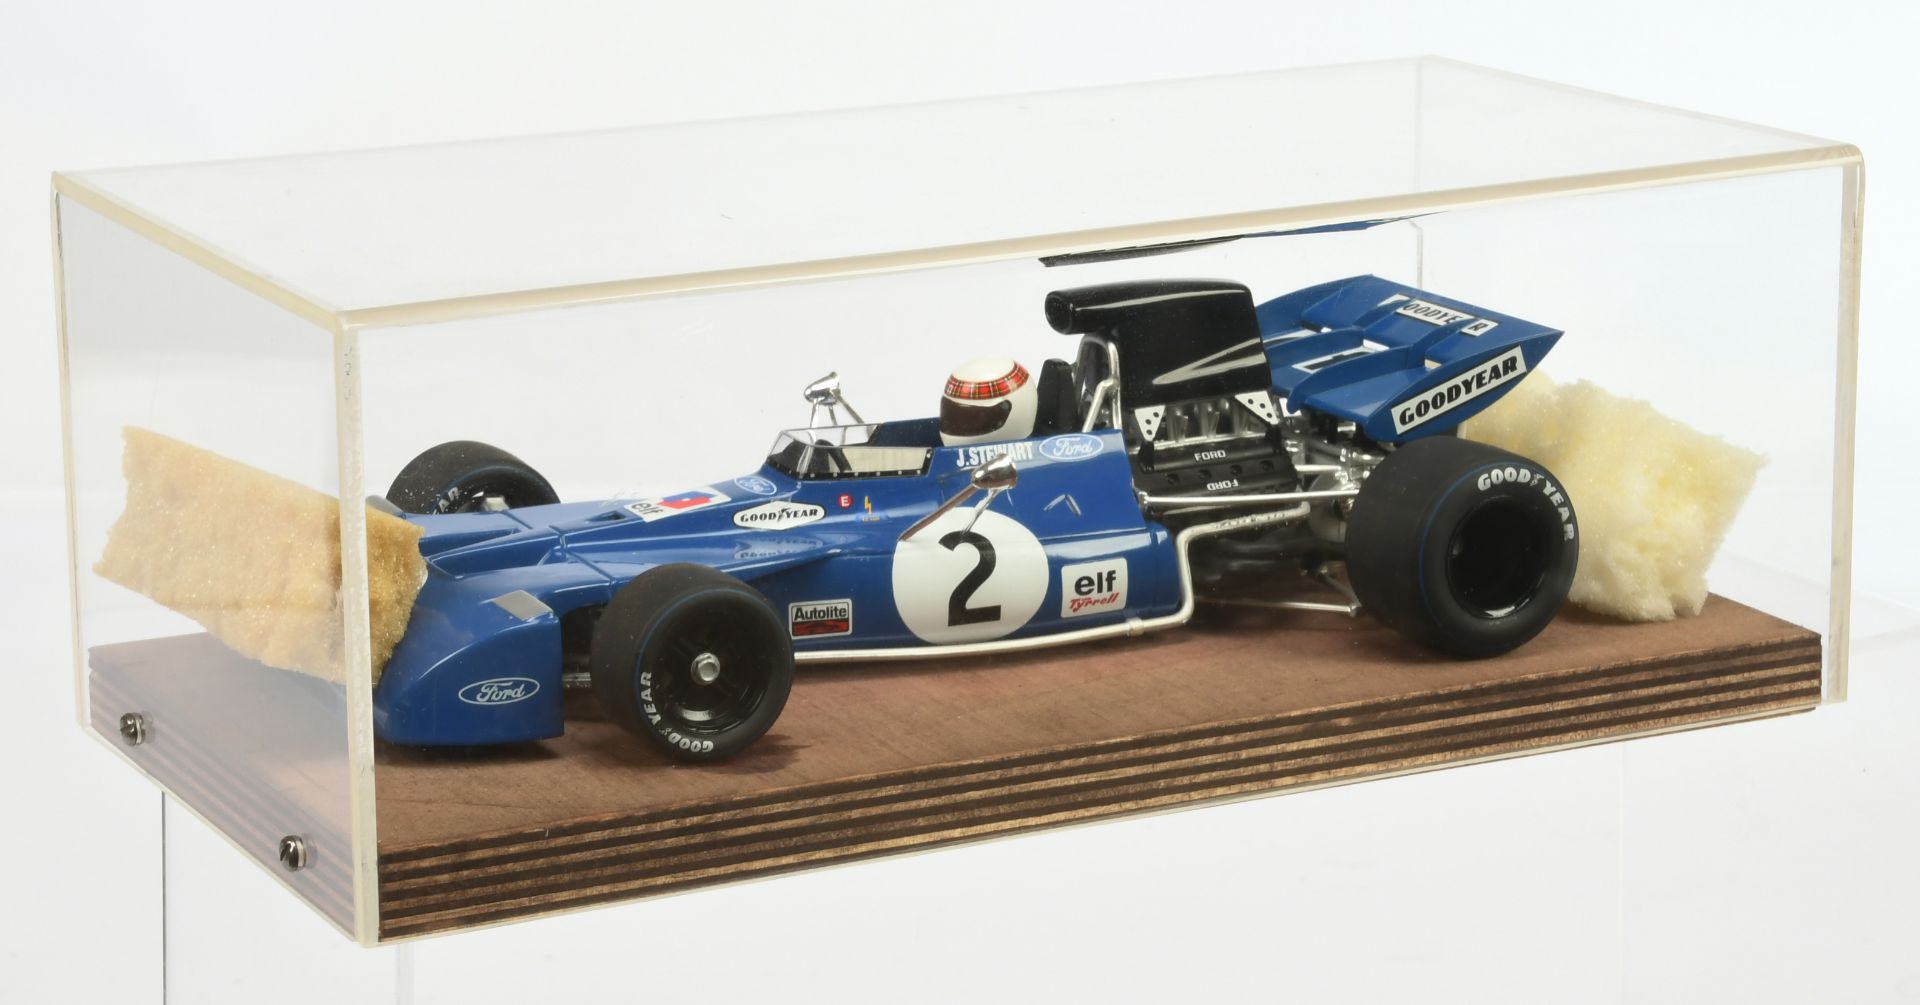 Minichamps racing car with racing number 2 and J. Stewart as a driver, 